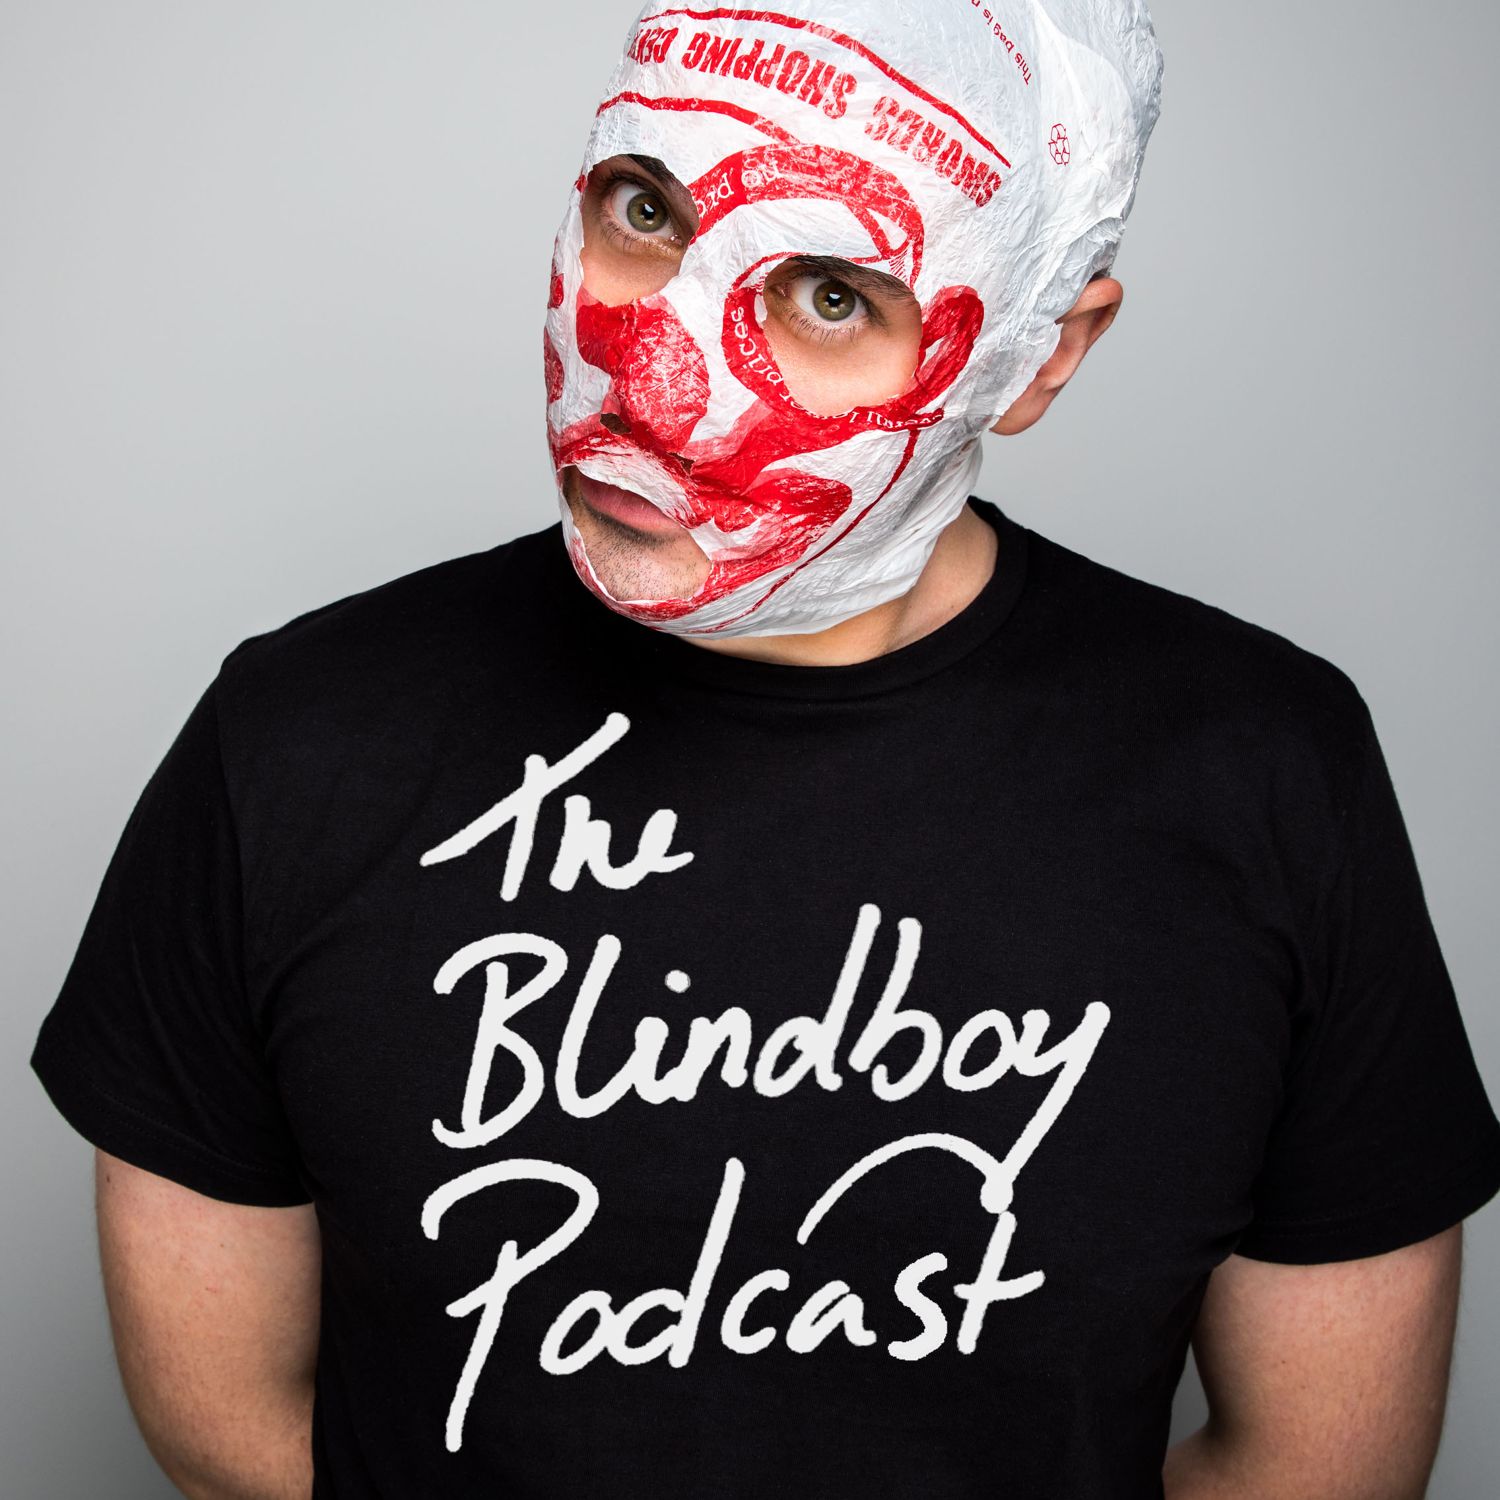 The Blindboy Podcast podcast show image